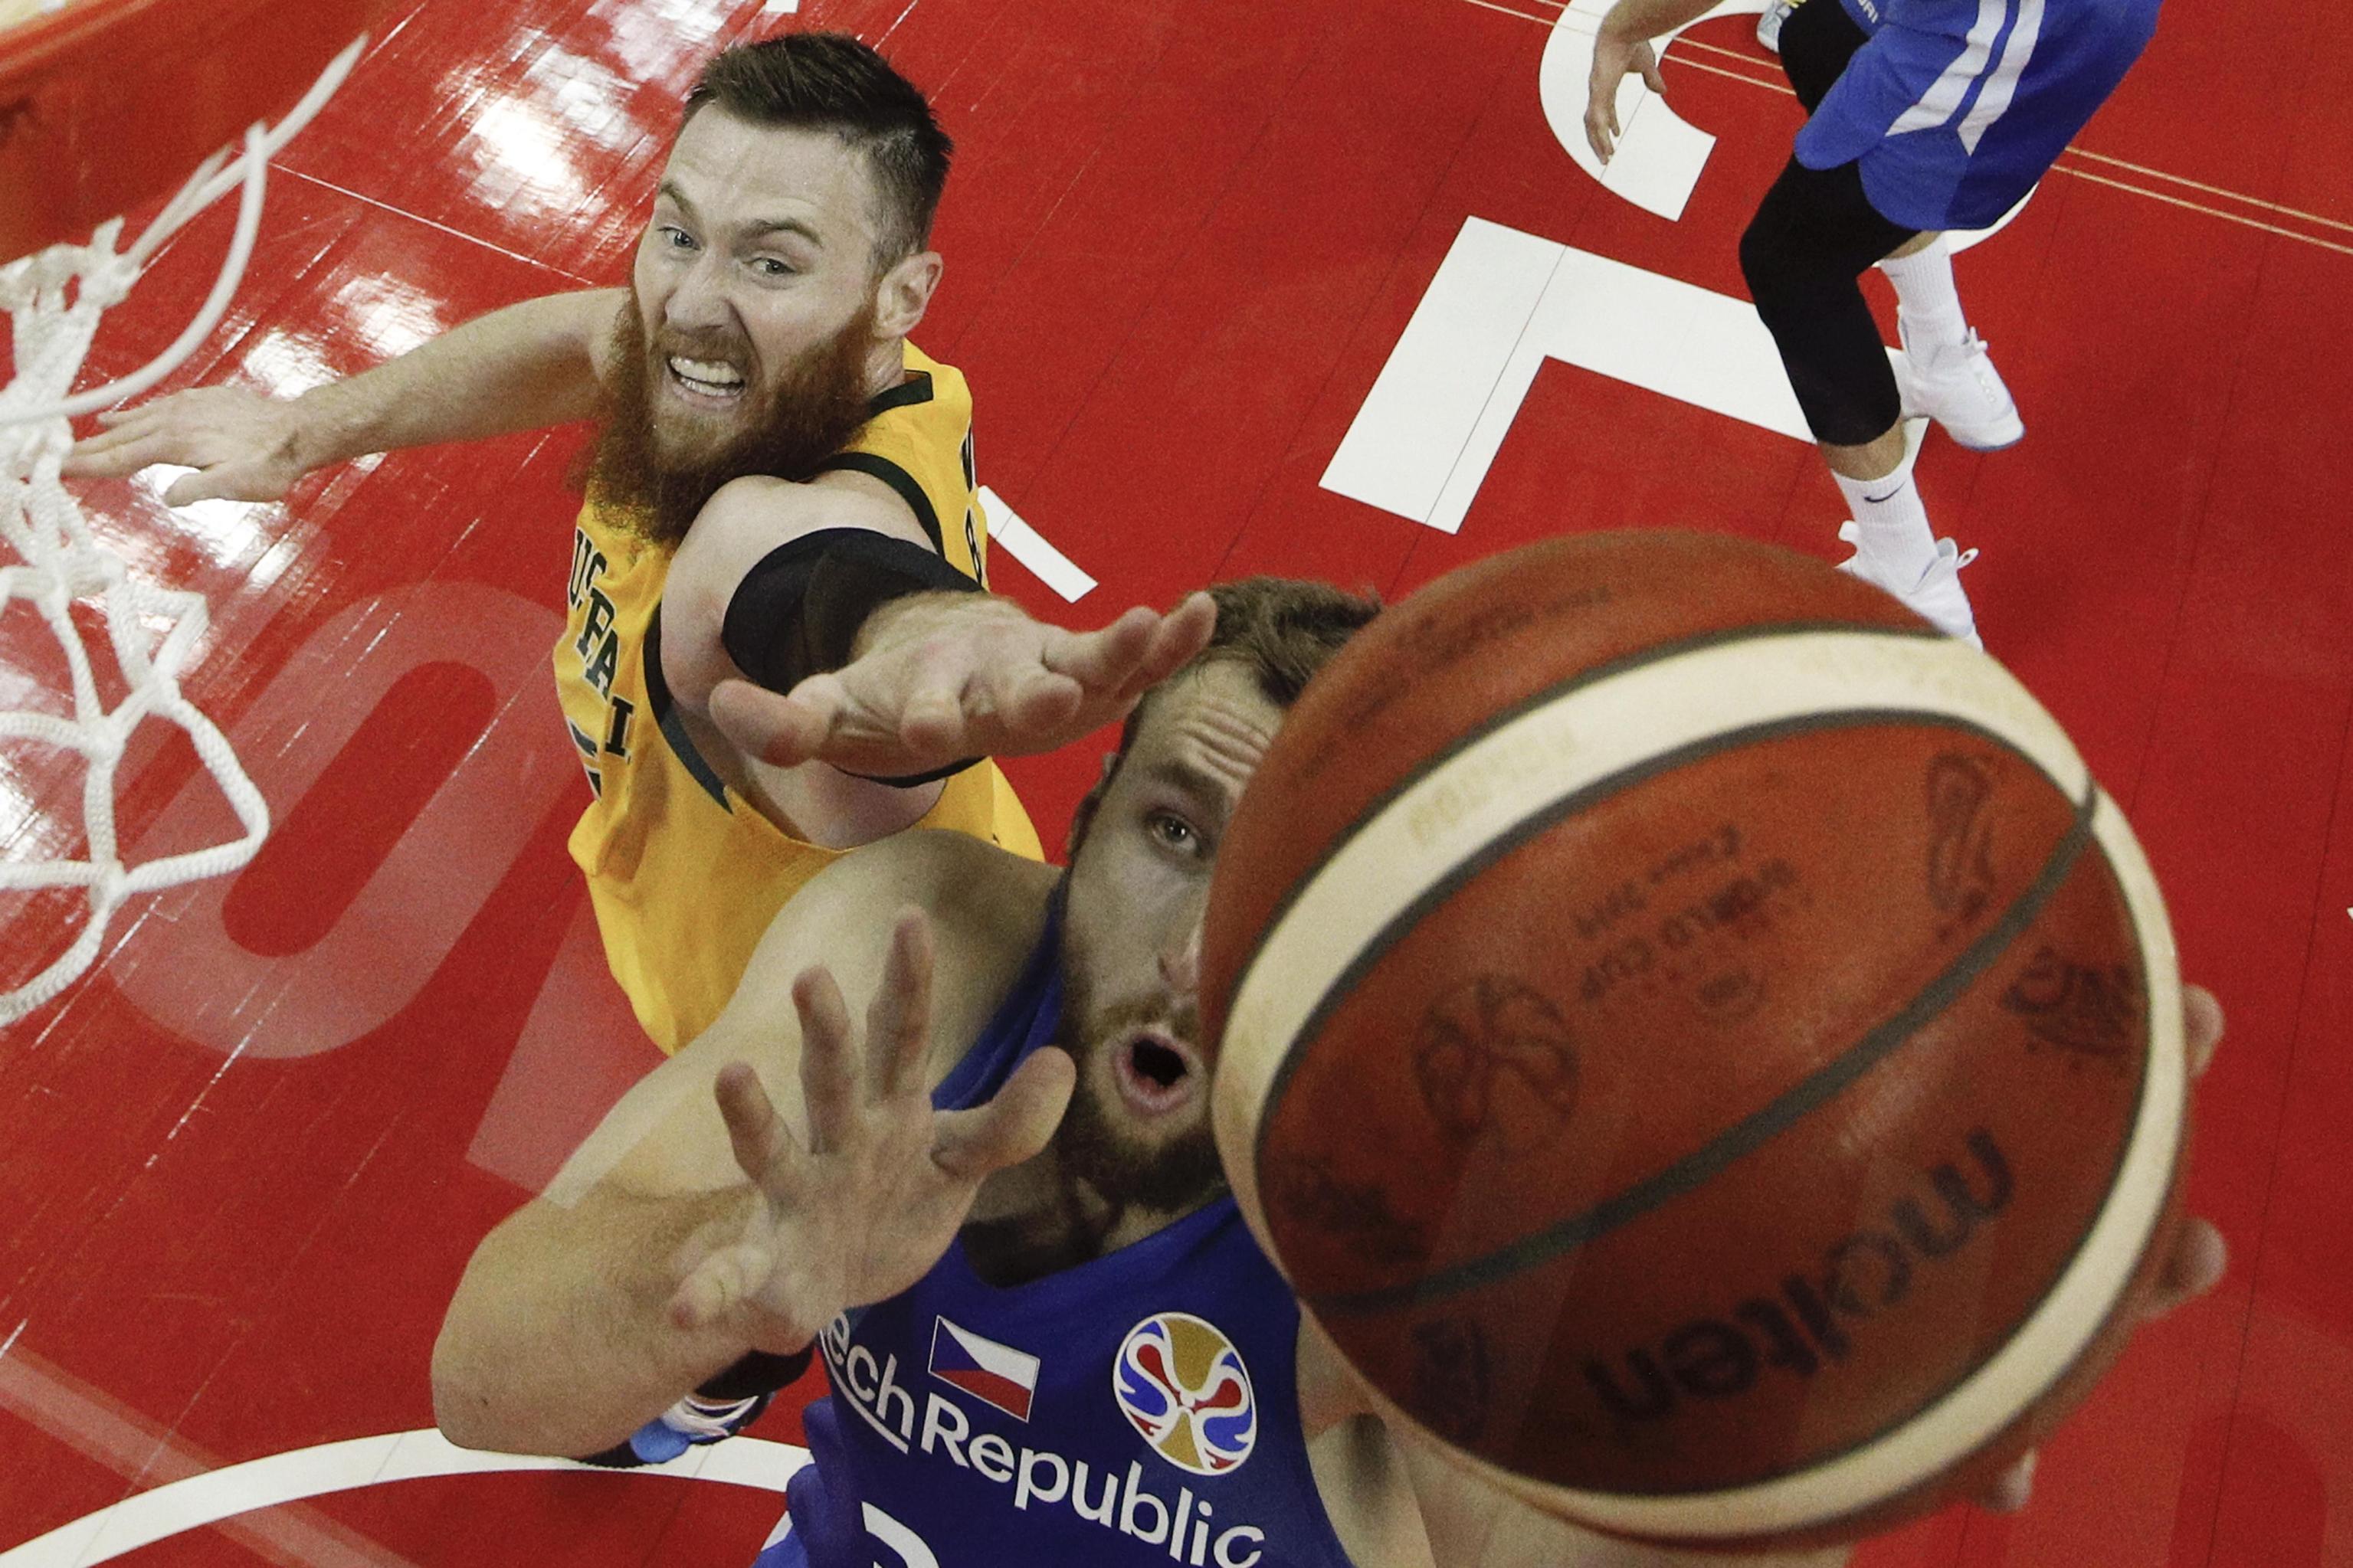 epa07835801 Martin Kriz of Czech Republic goes for a shot over Nathan Sobey of Australia during their quarterfinals match for the FIBA Basketball World Cup at the Shanghai Oriental Sports Center in Shanghai, China, 11 September 2019.  EPA/ANDY WONG / POOL